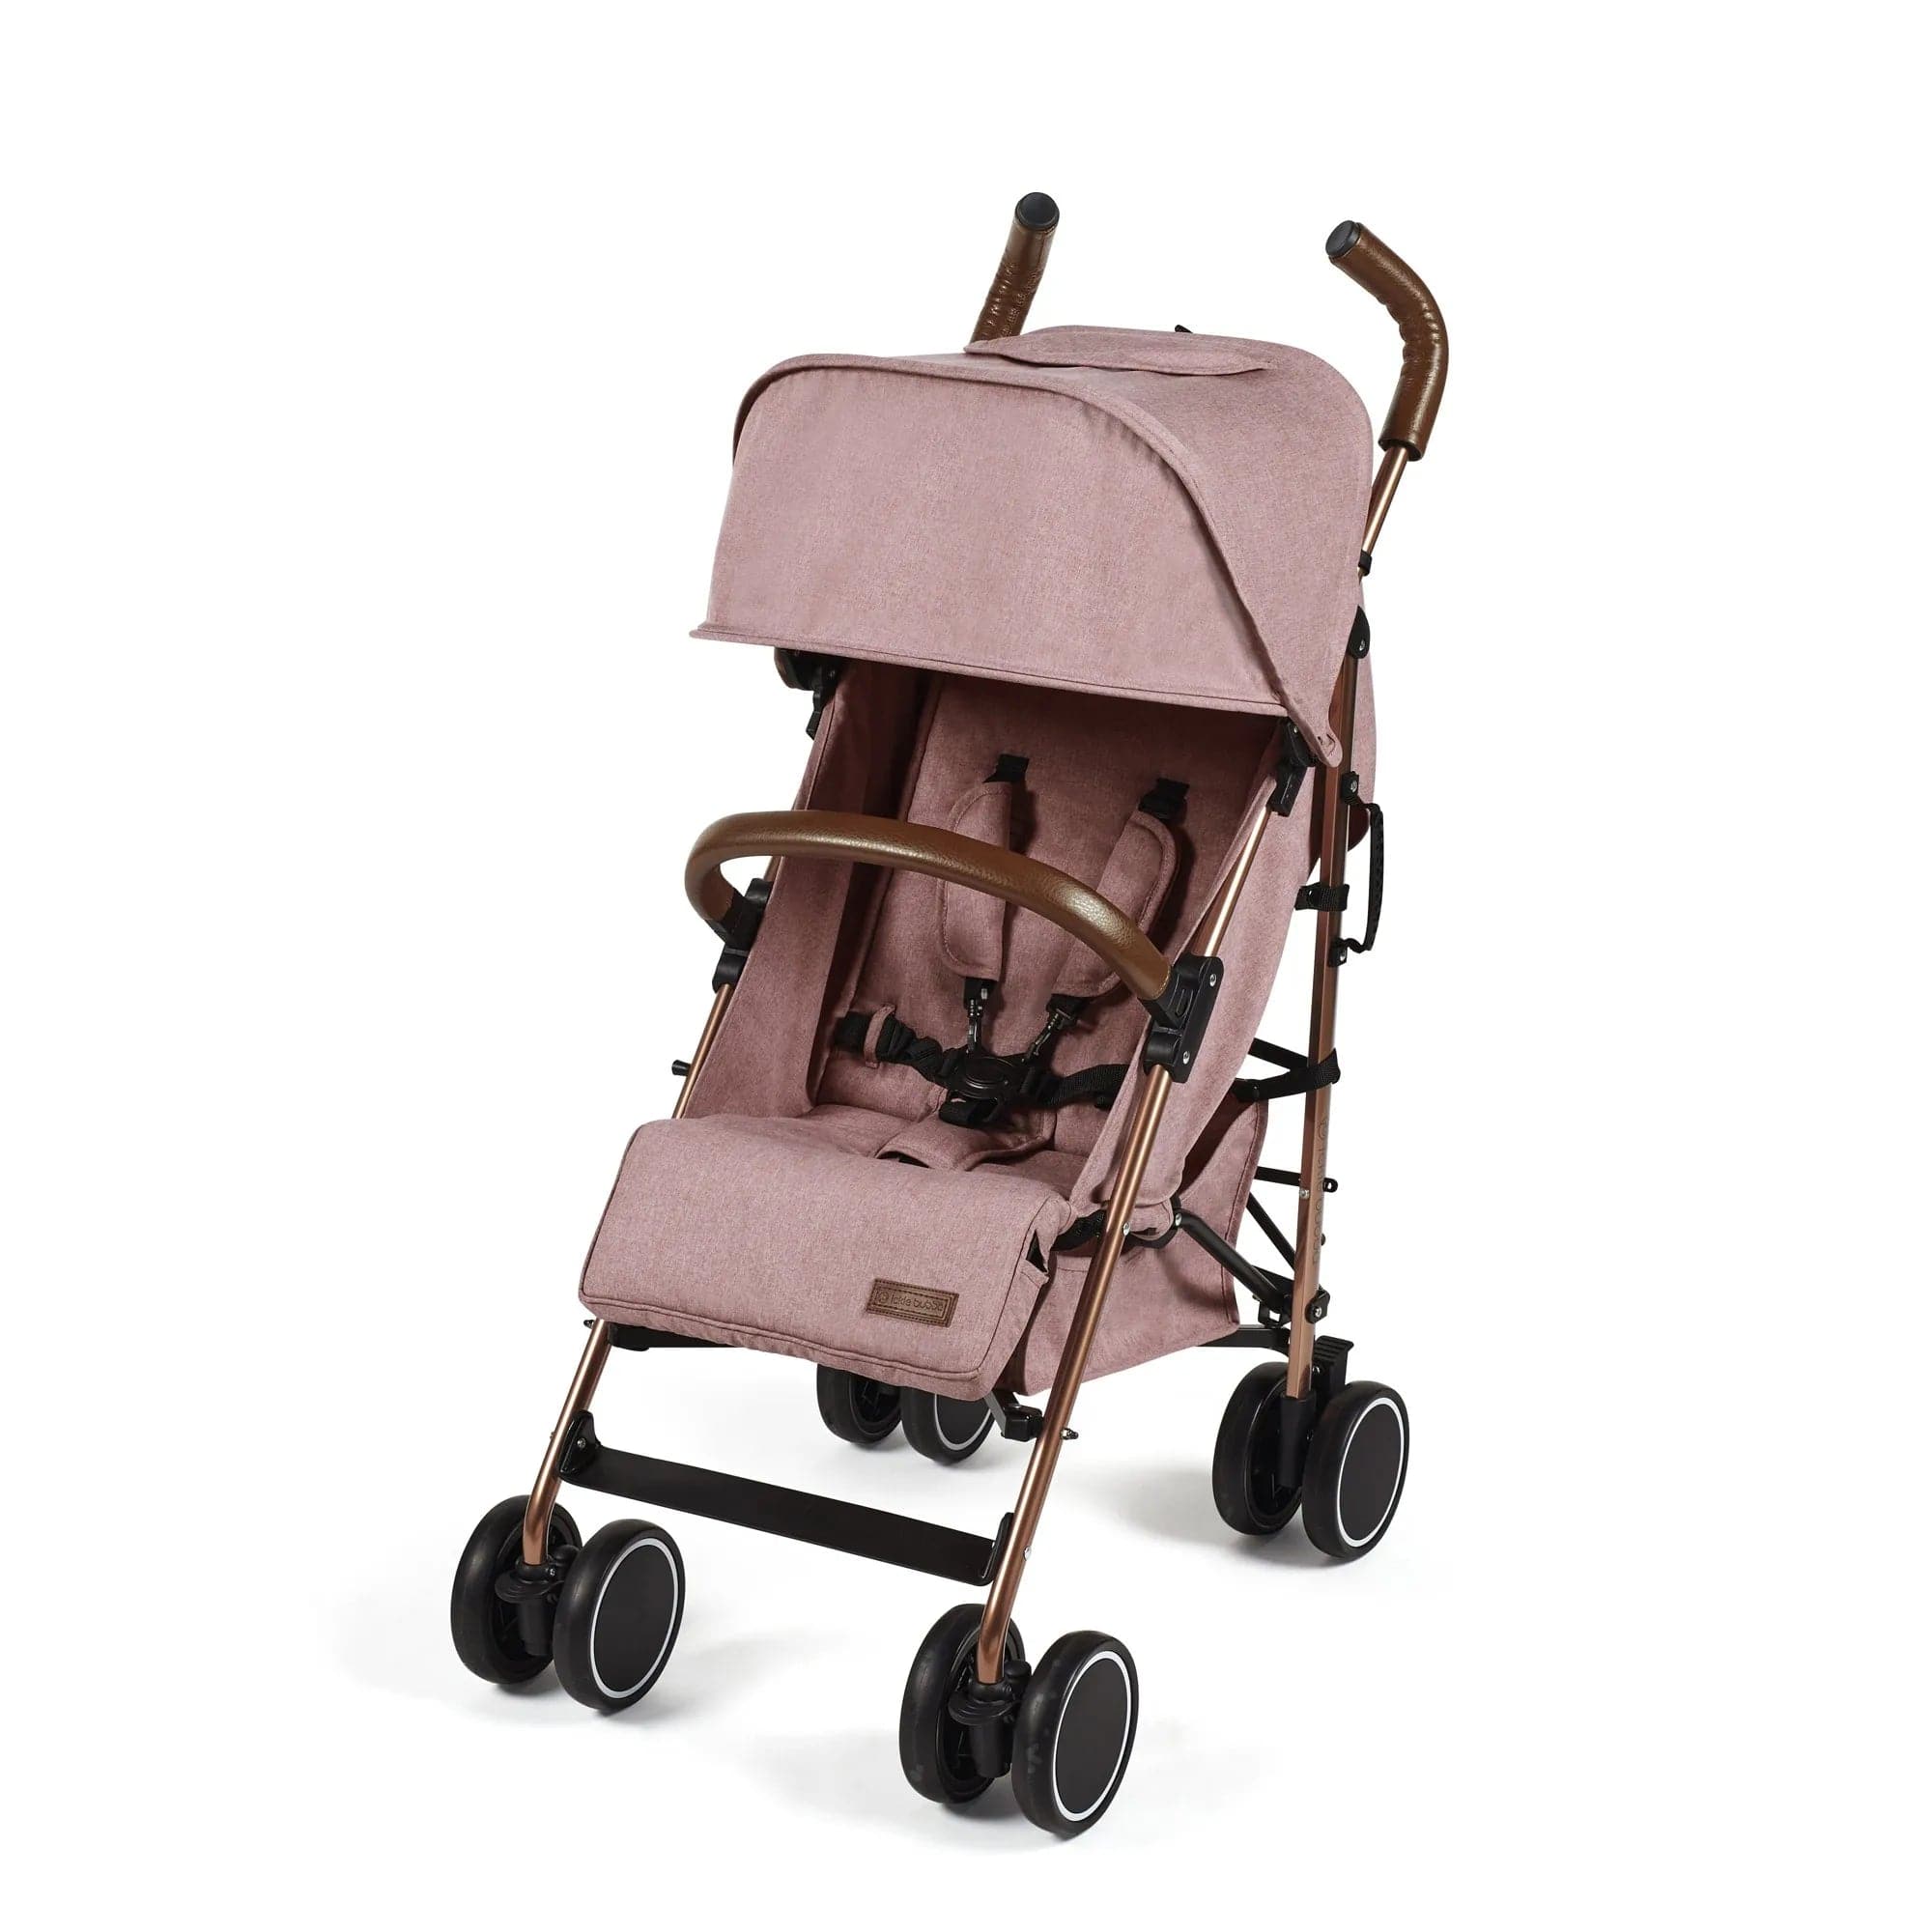 Ickle bubba Discovery Prime Stroller -  Rose Gold / Dusky Pink -  | For Your Little One